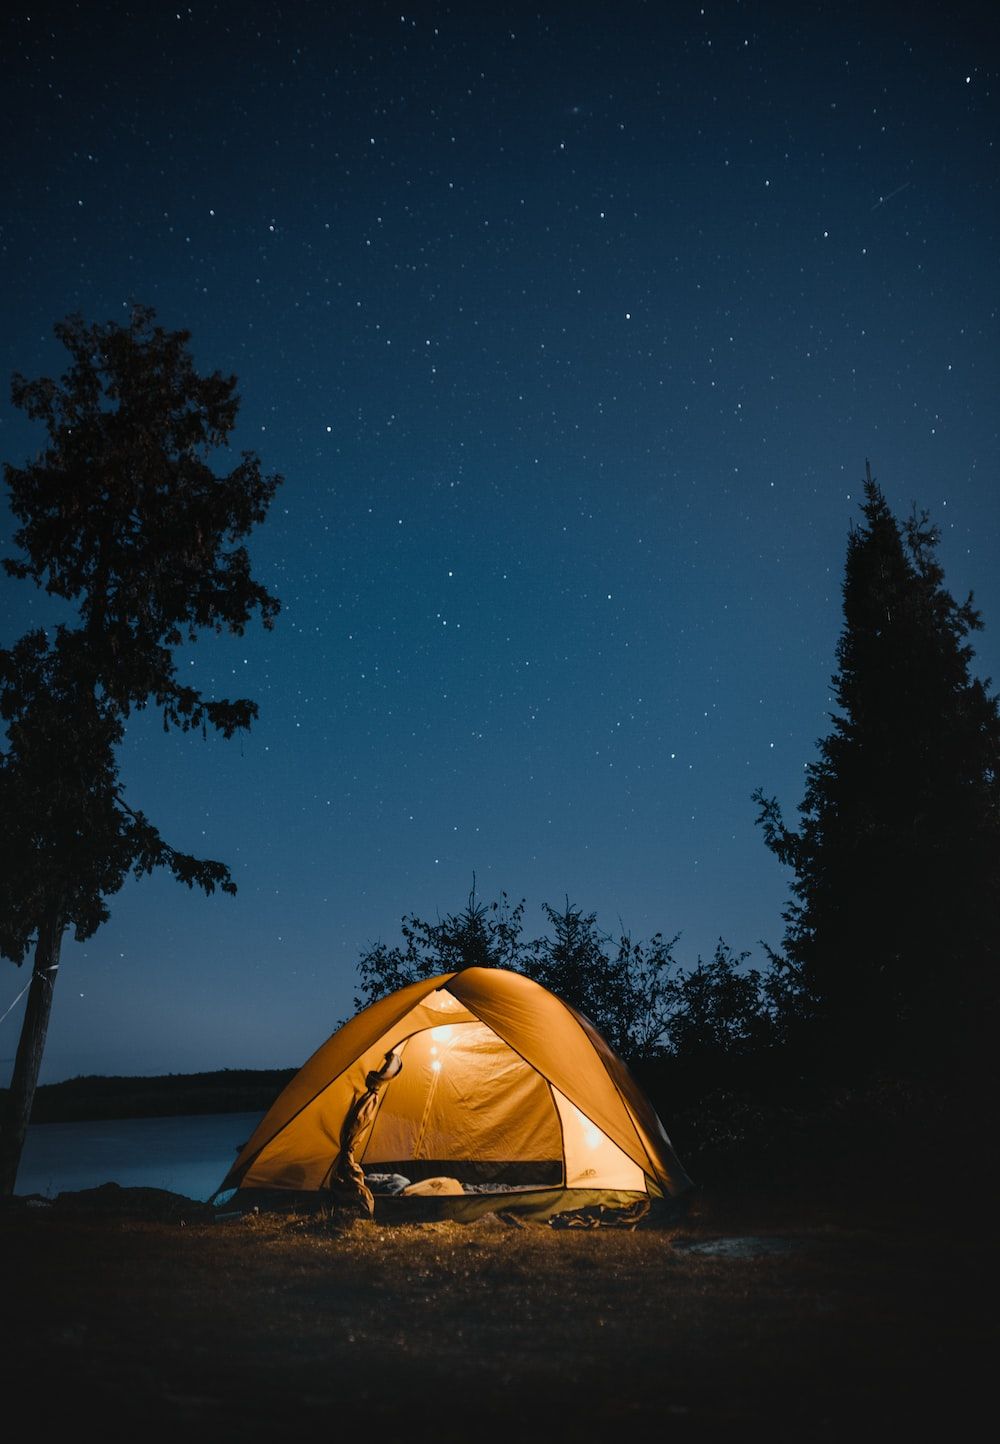 A cozy camping site under the night sky with a warm glow from the tent. - Camping